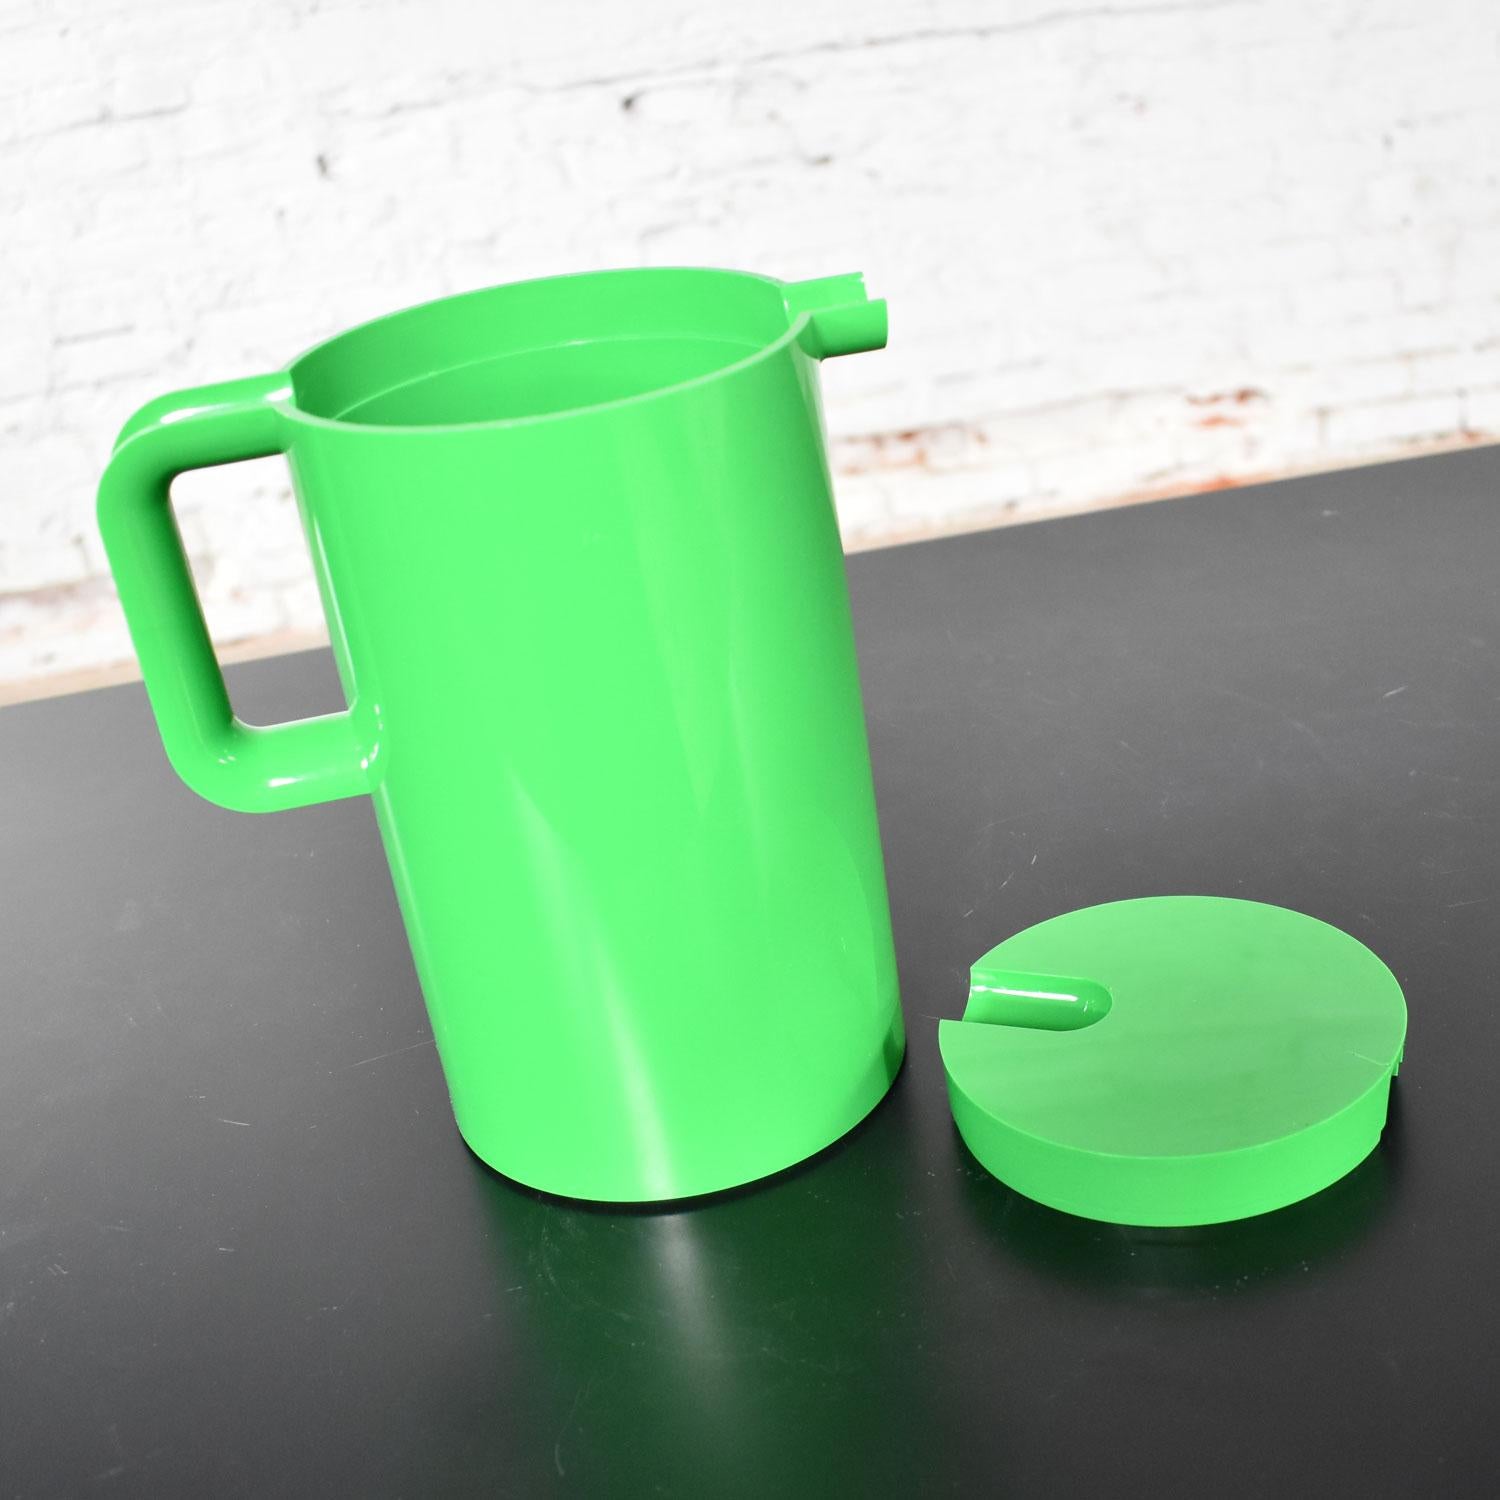 Heller Dinnerware by Lella & Massimo Vignelli in Kelly Green 58 Pieces & Napkins 3